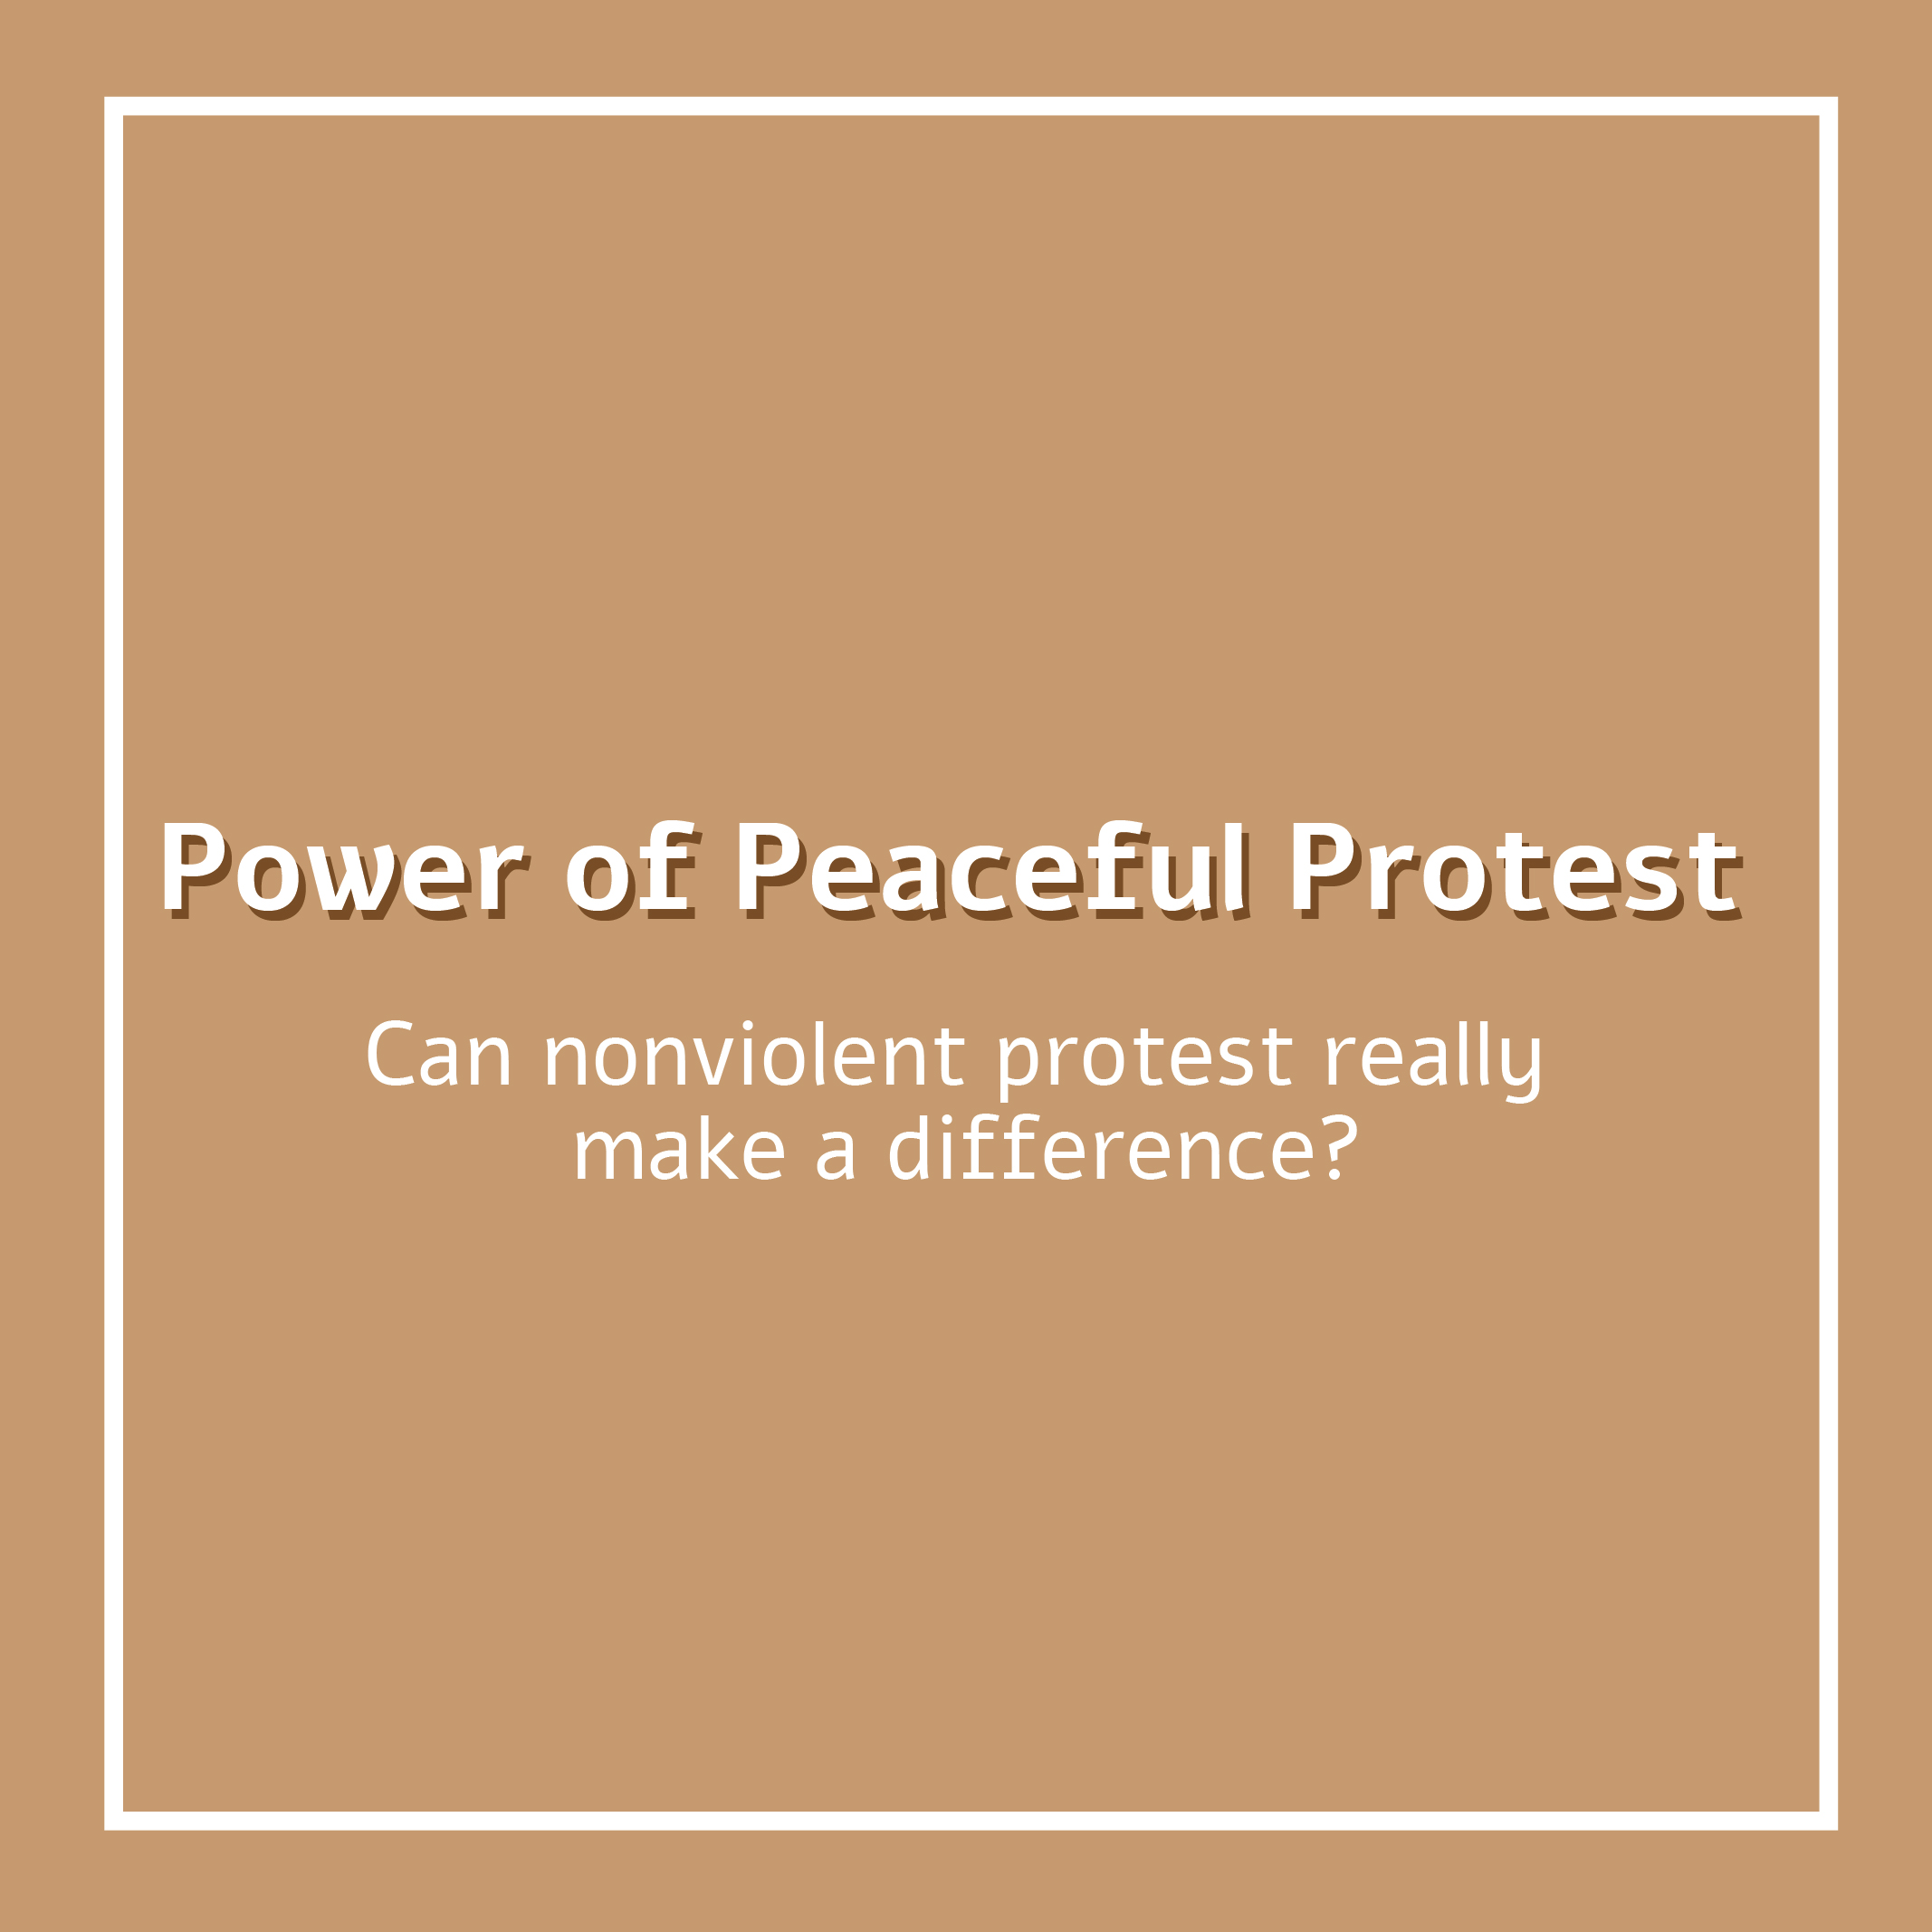 Power of Peaceful Protest